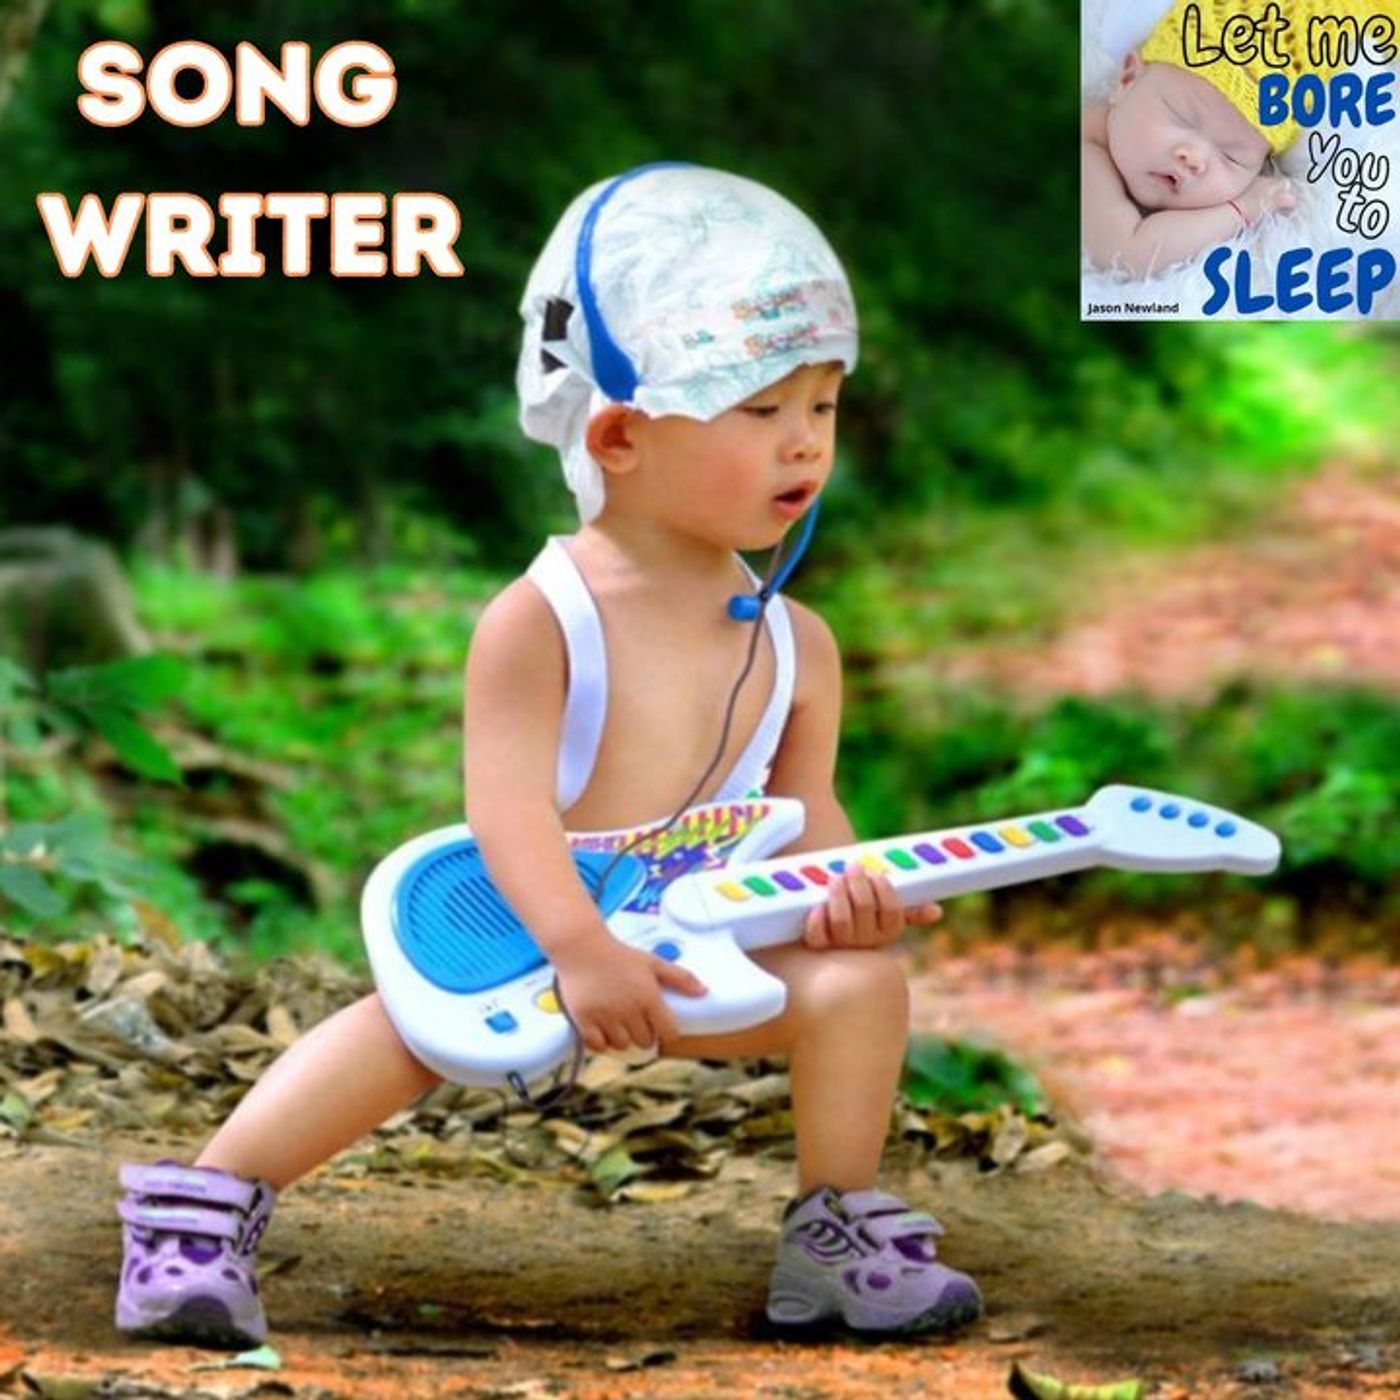 (10 hours) #1048 - Song writer - Let me bore you to sleep